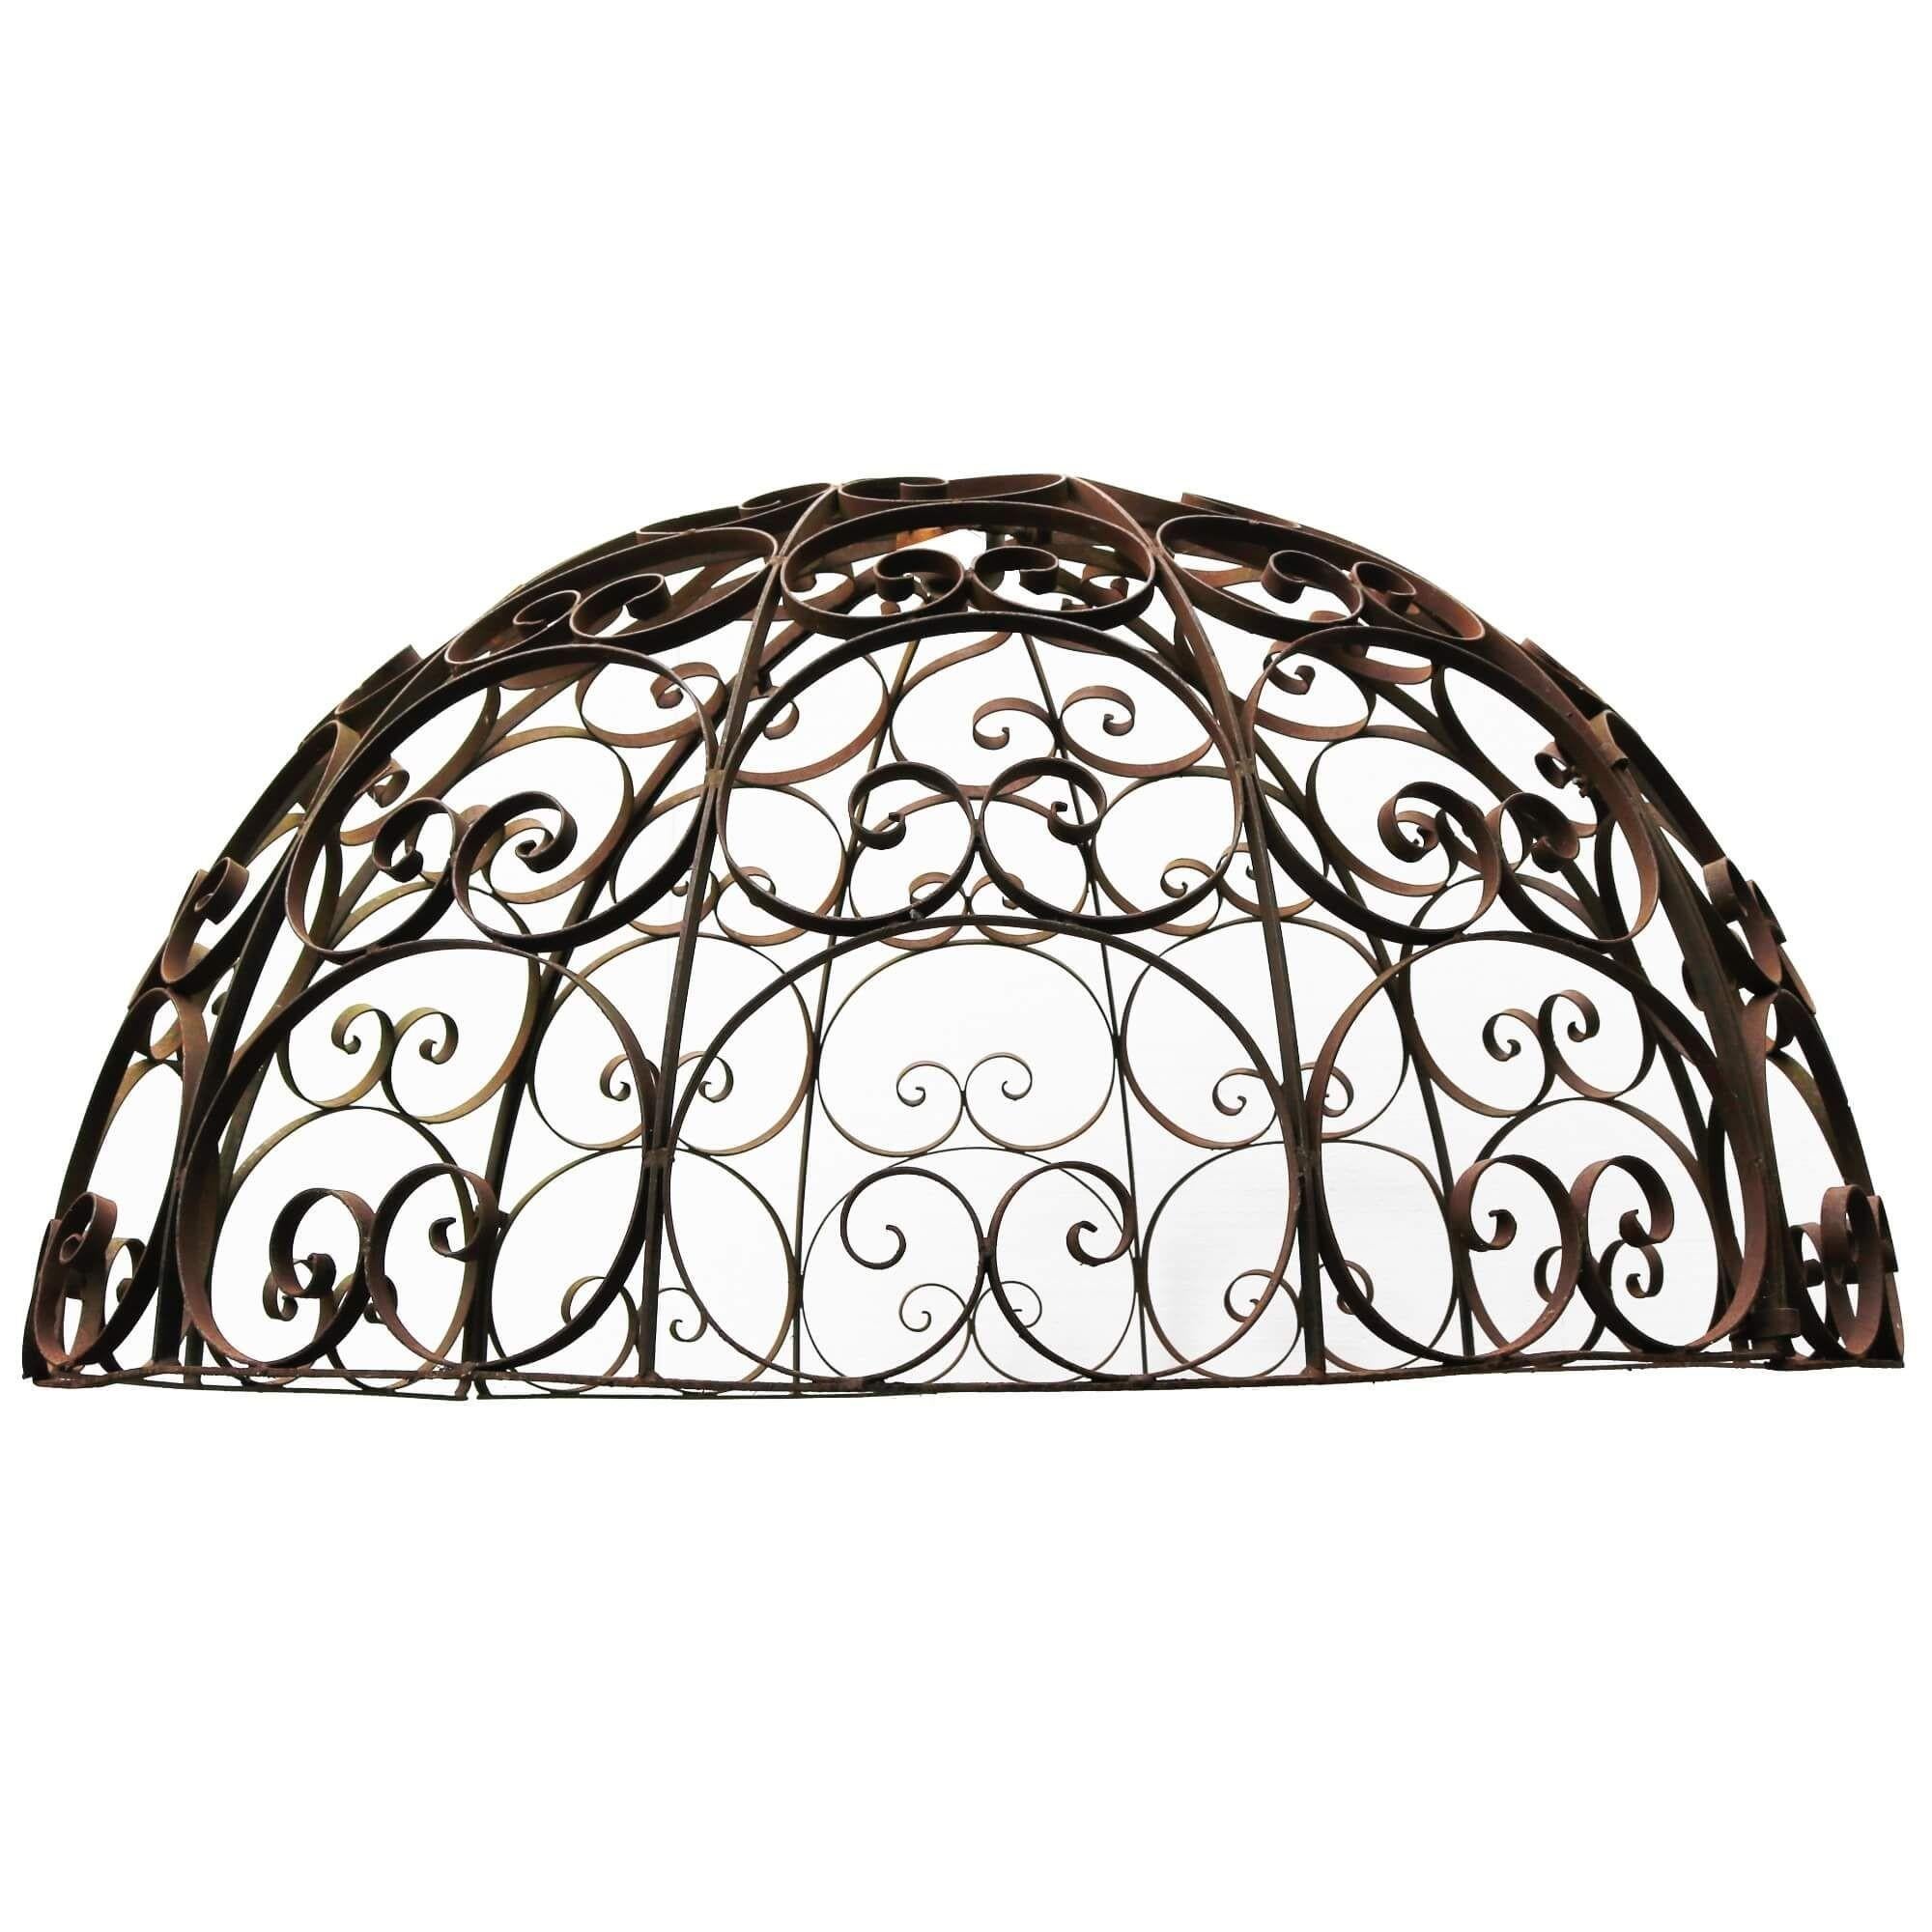 Made at the hand a talented blacksmith during the 1930s, this wrought iron dome is an ornate feature for the garden or courtyard of an idyllic and finely landscaped country estate. It could be placed atop a stone or wrought iron gazebo as a focal